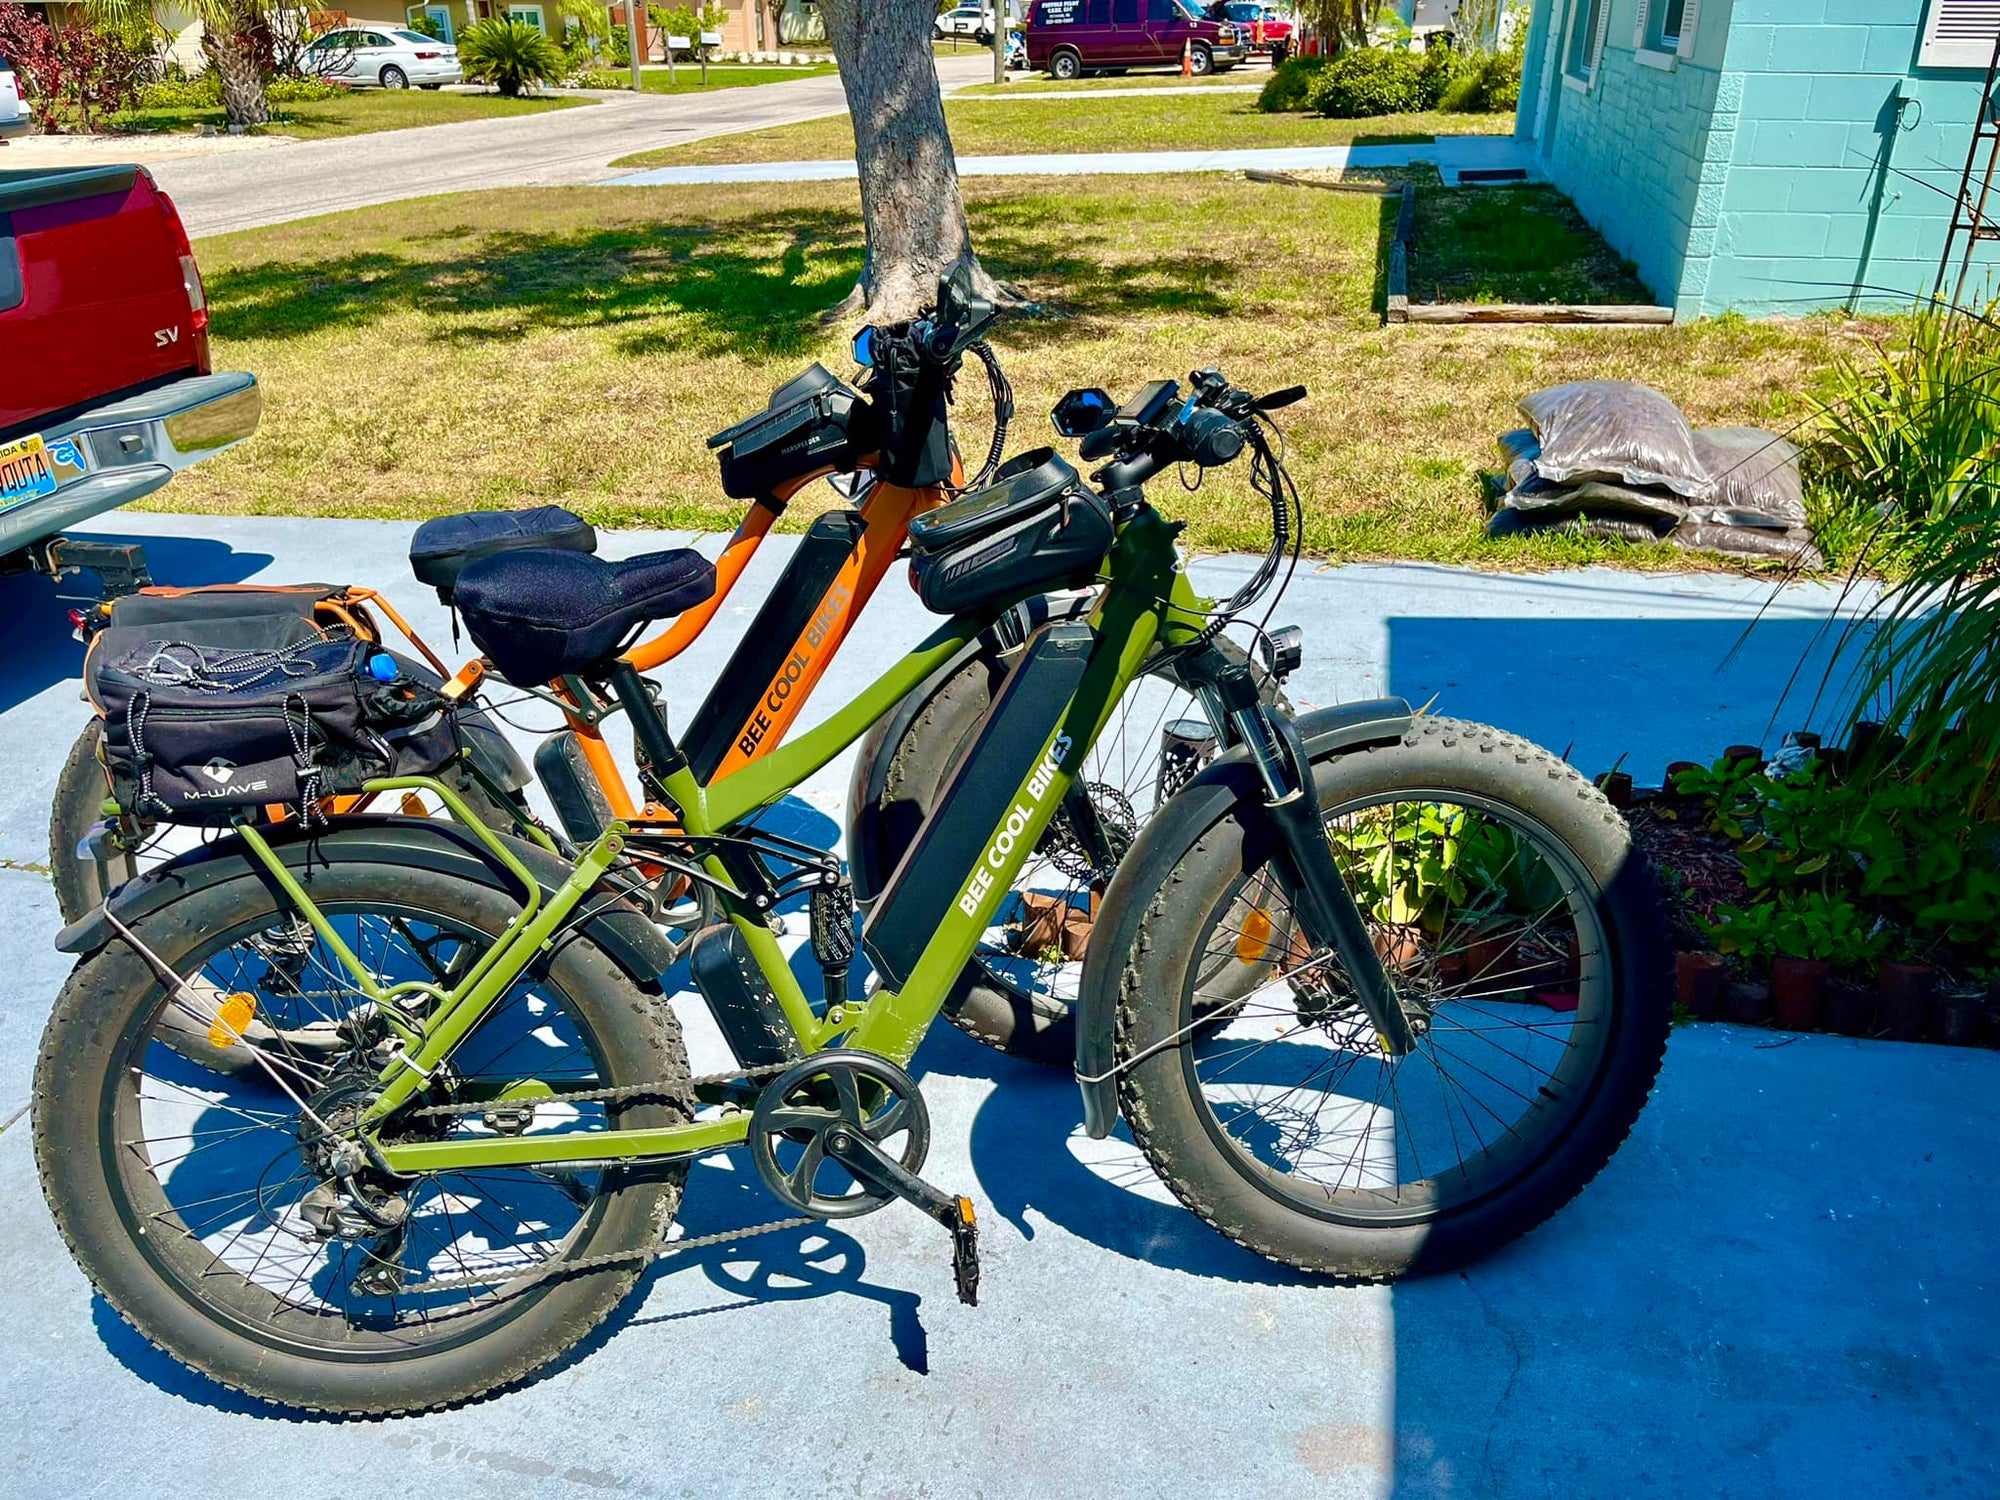 The Rise of eBike Tourism: Exploring the USA on Two Wheels